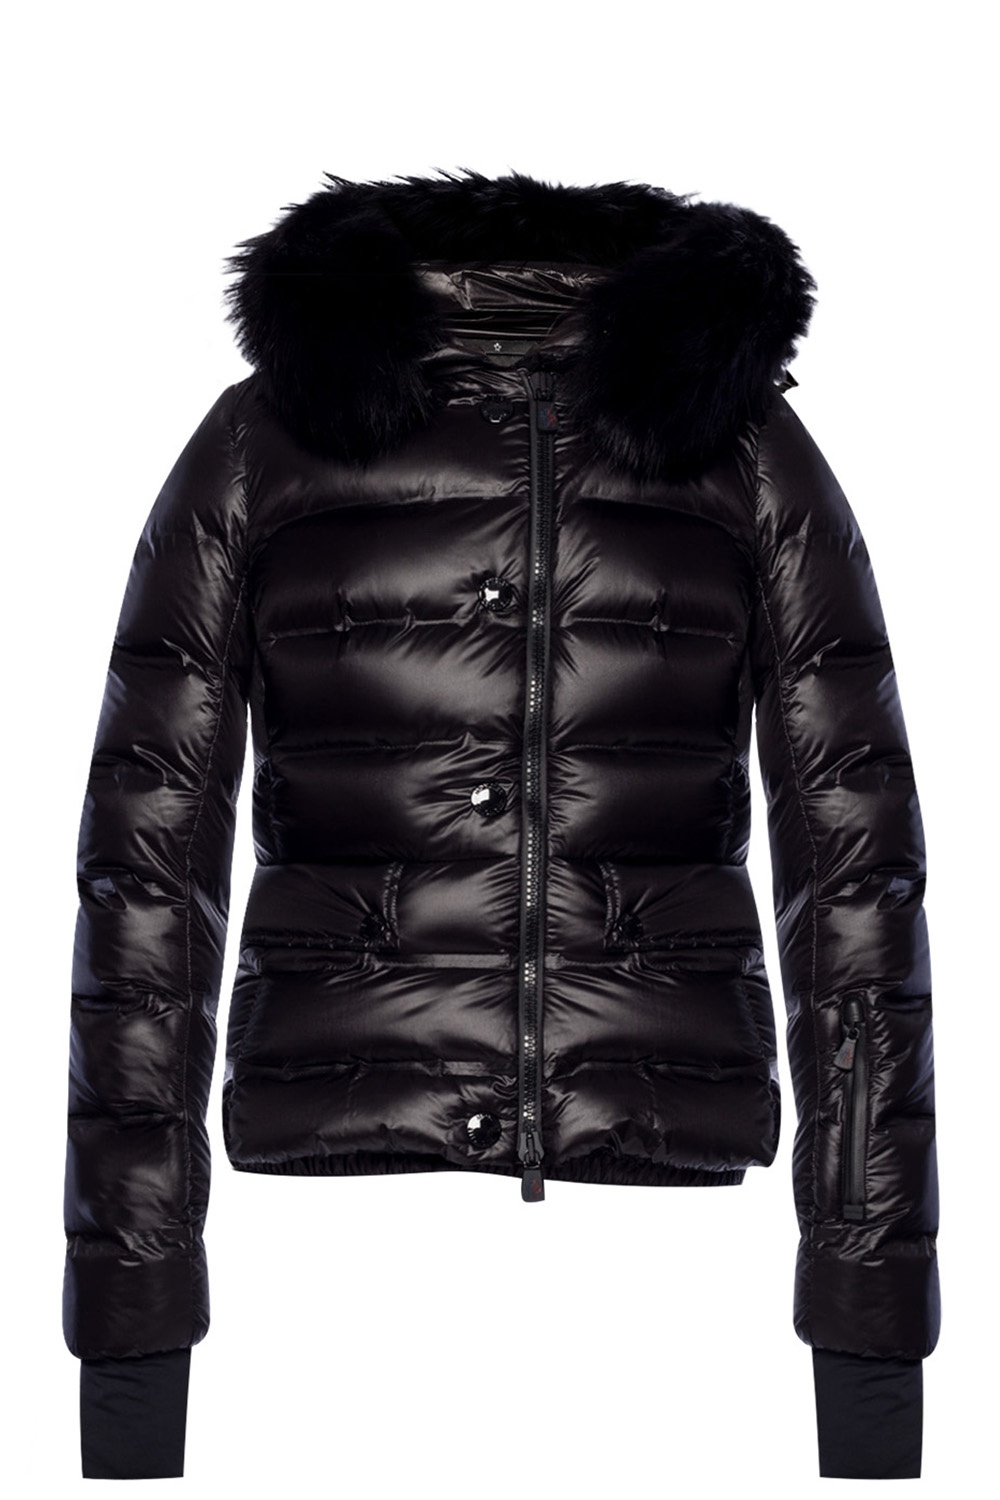 Armotech' quilted down jacket Moncler 